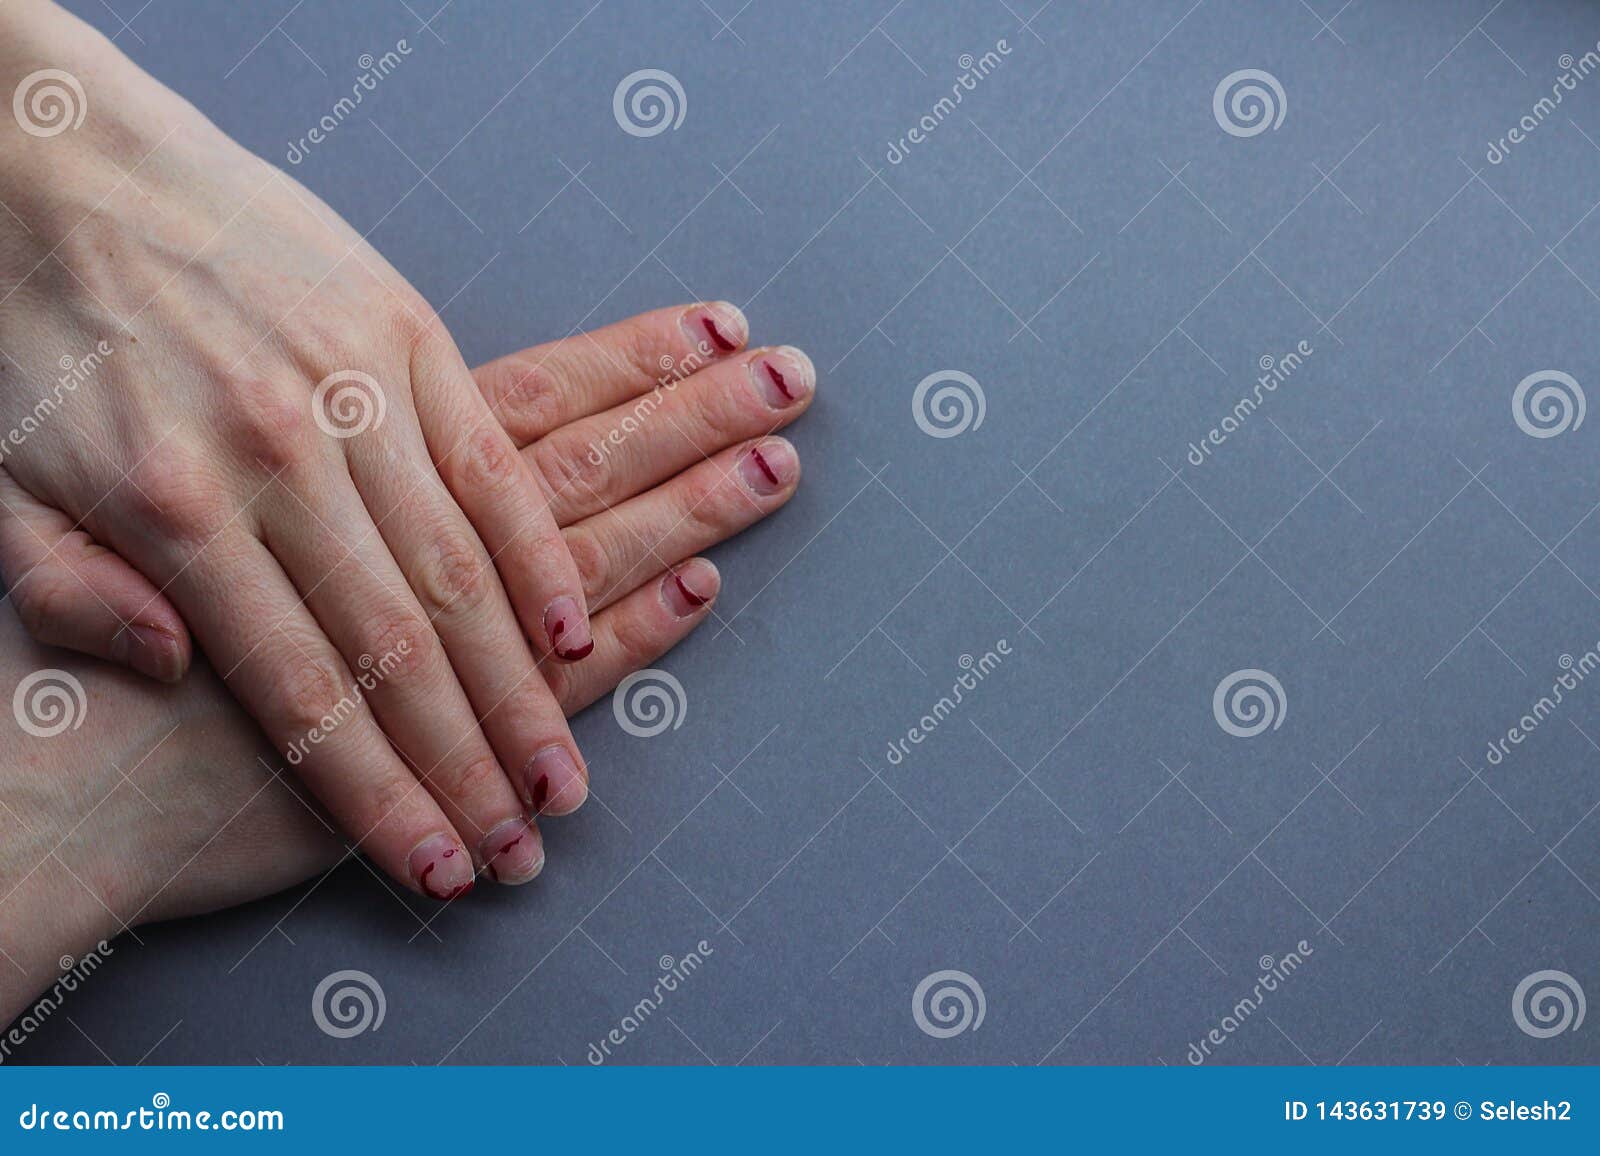 chipped, stratified nails. nails after gel polish. untidy hands on a gray background.the view from the top